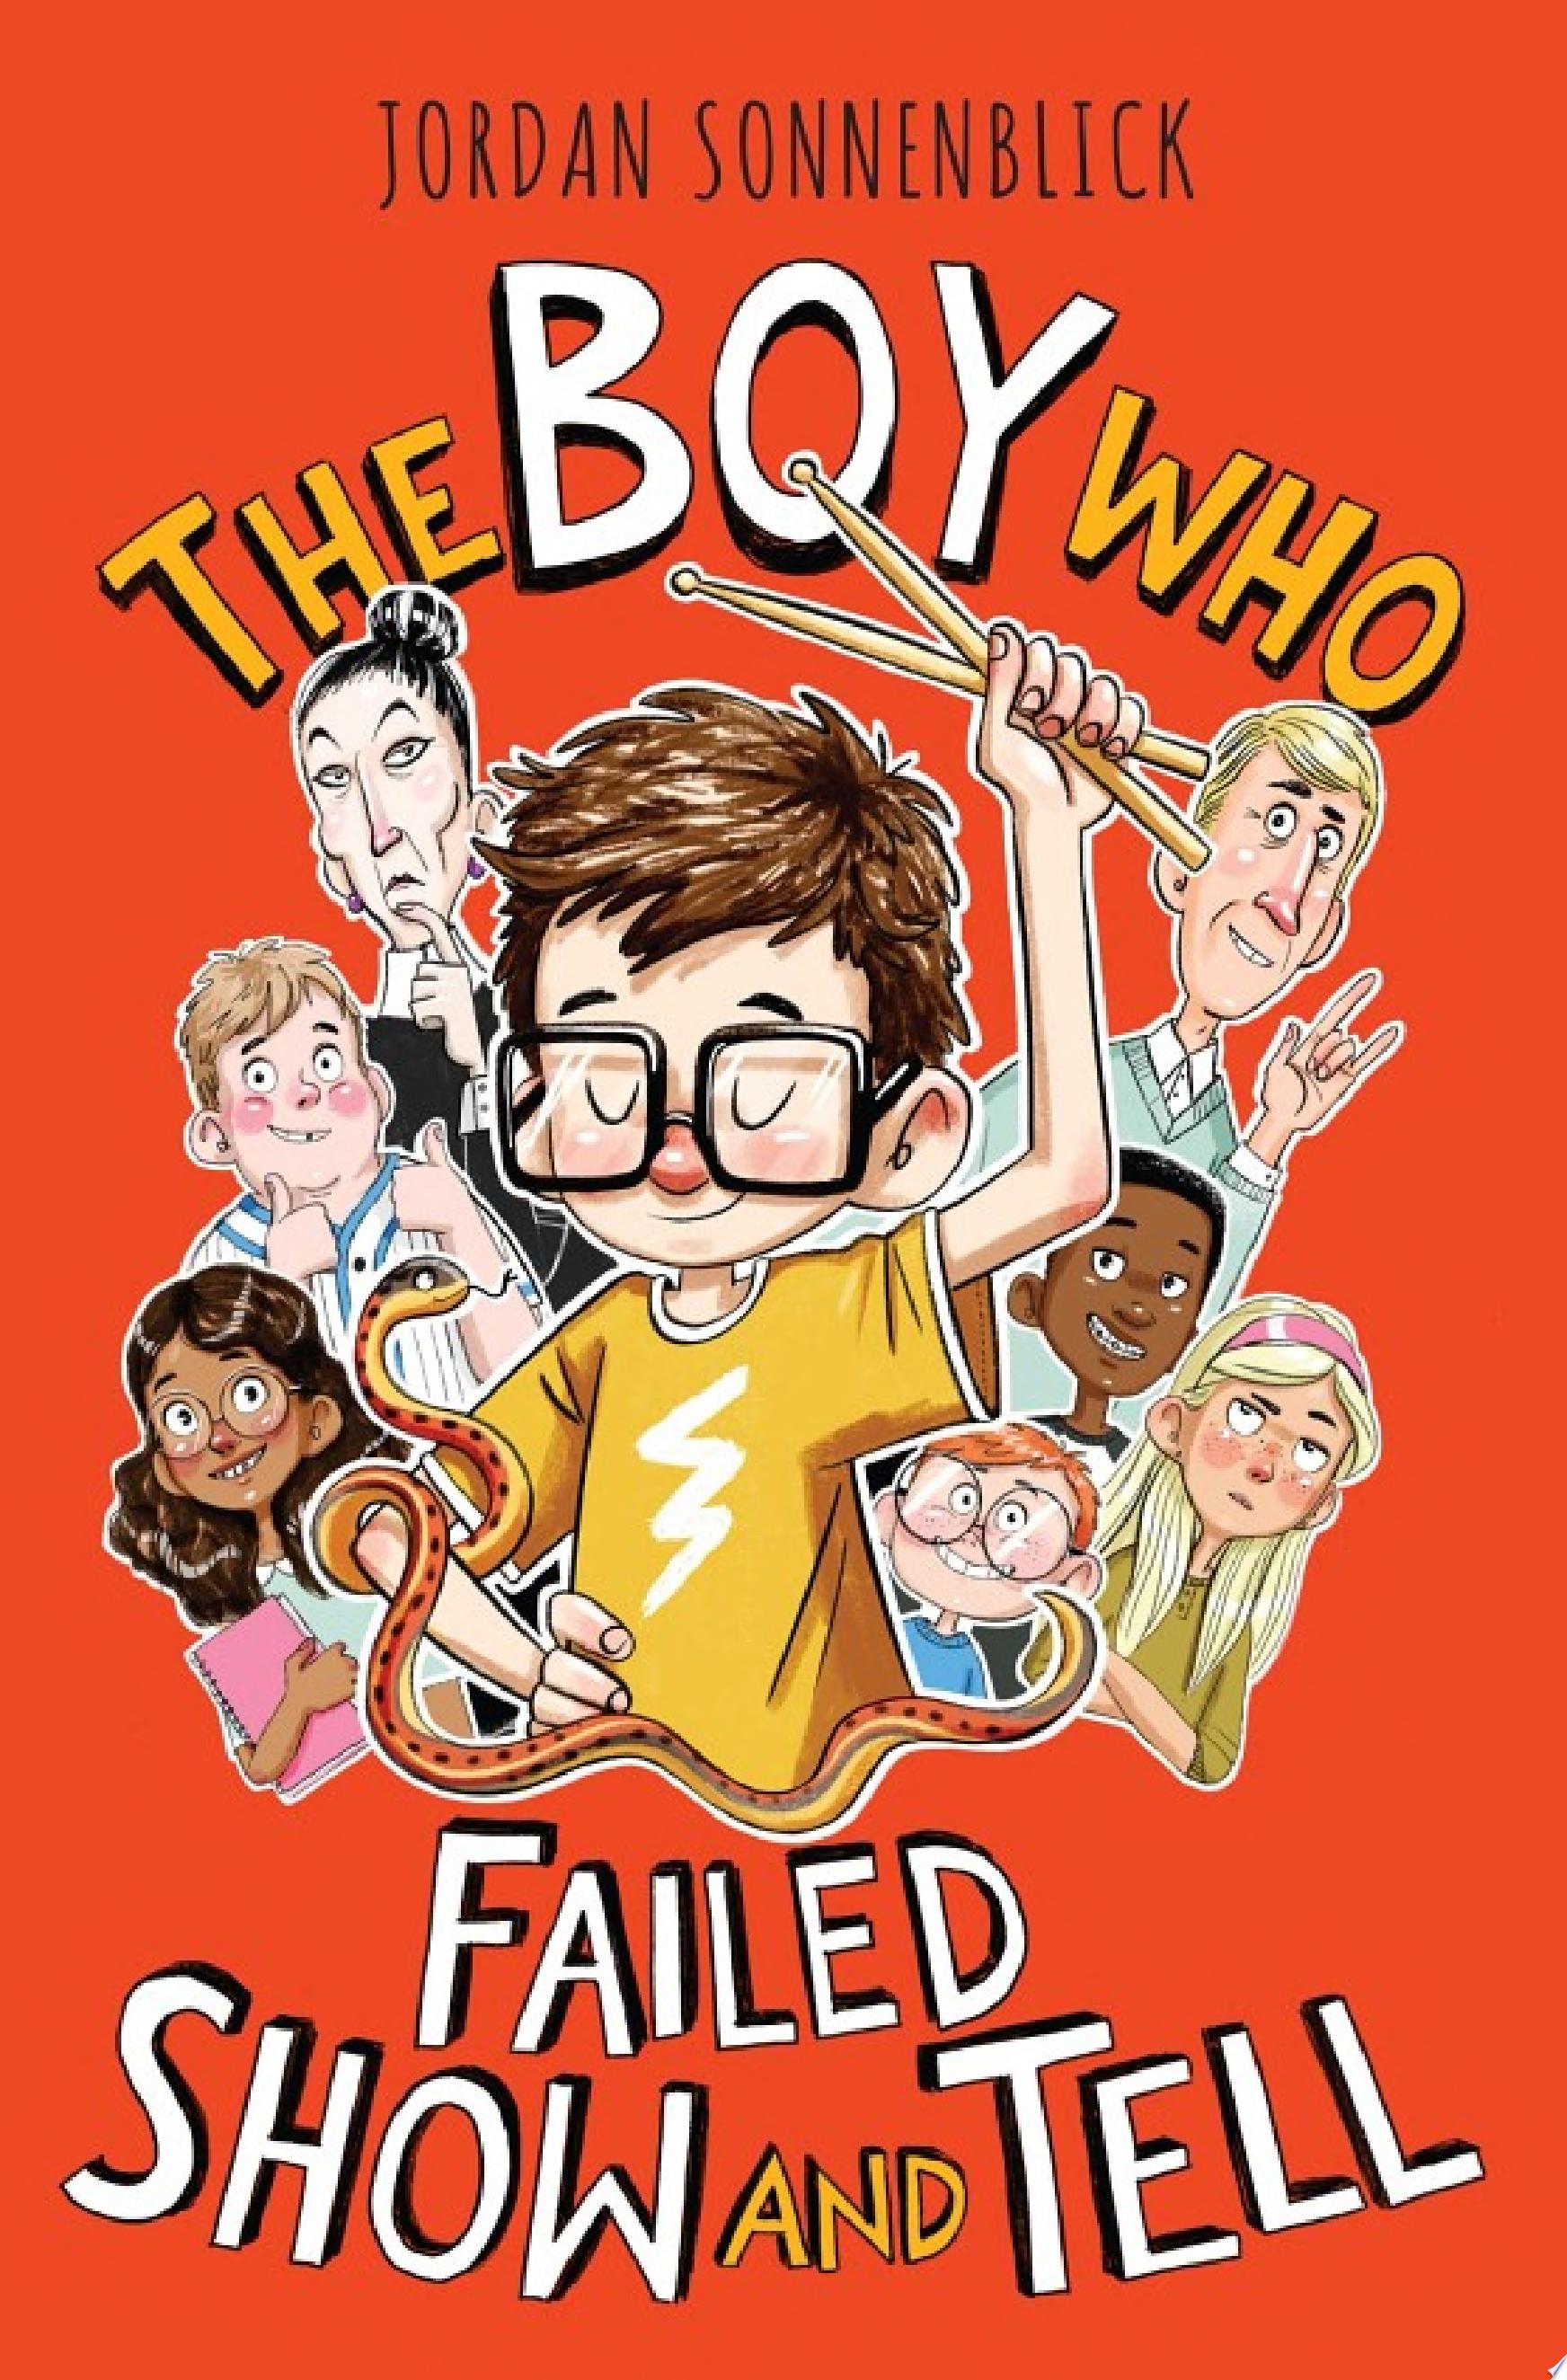 Image for "The Boy Who Failed Show and Tell"